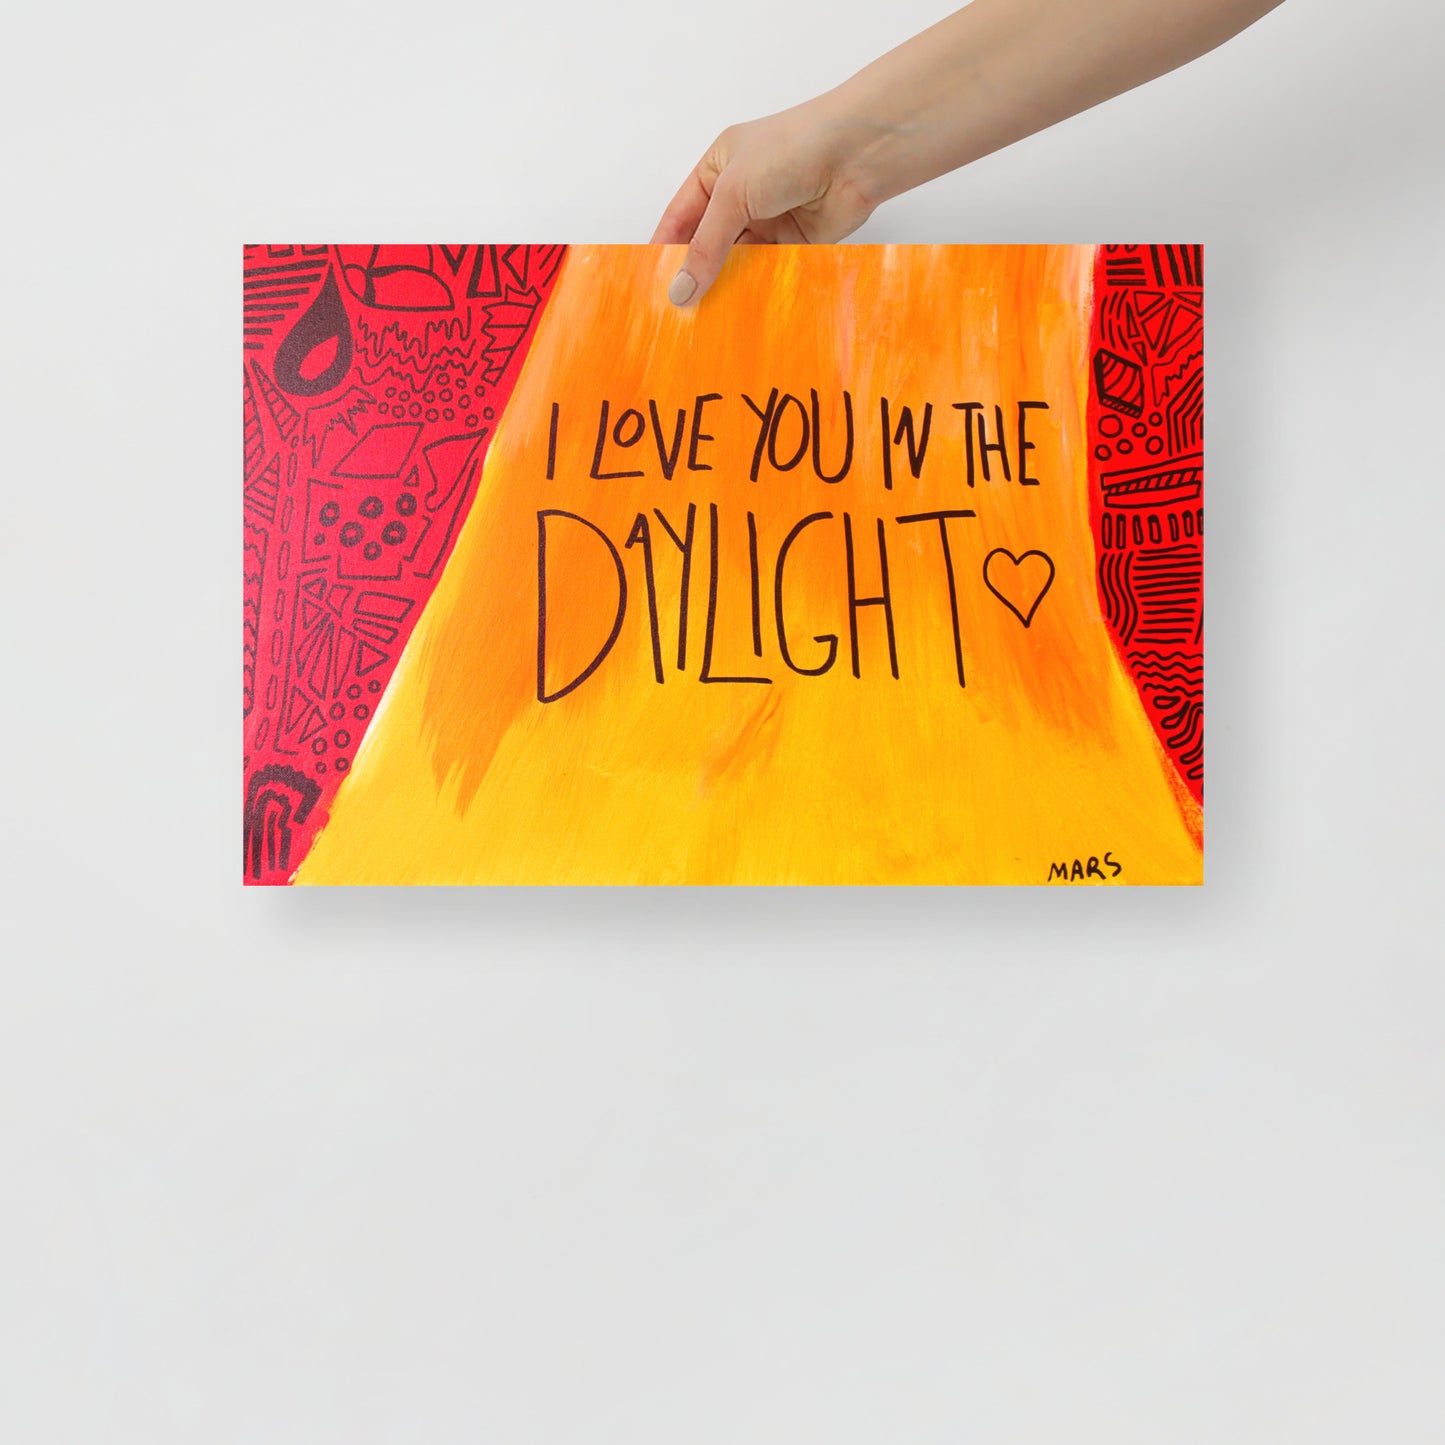 I love you in the daylight print